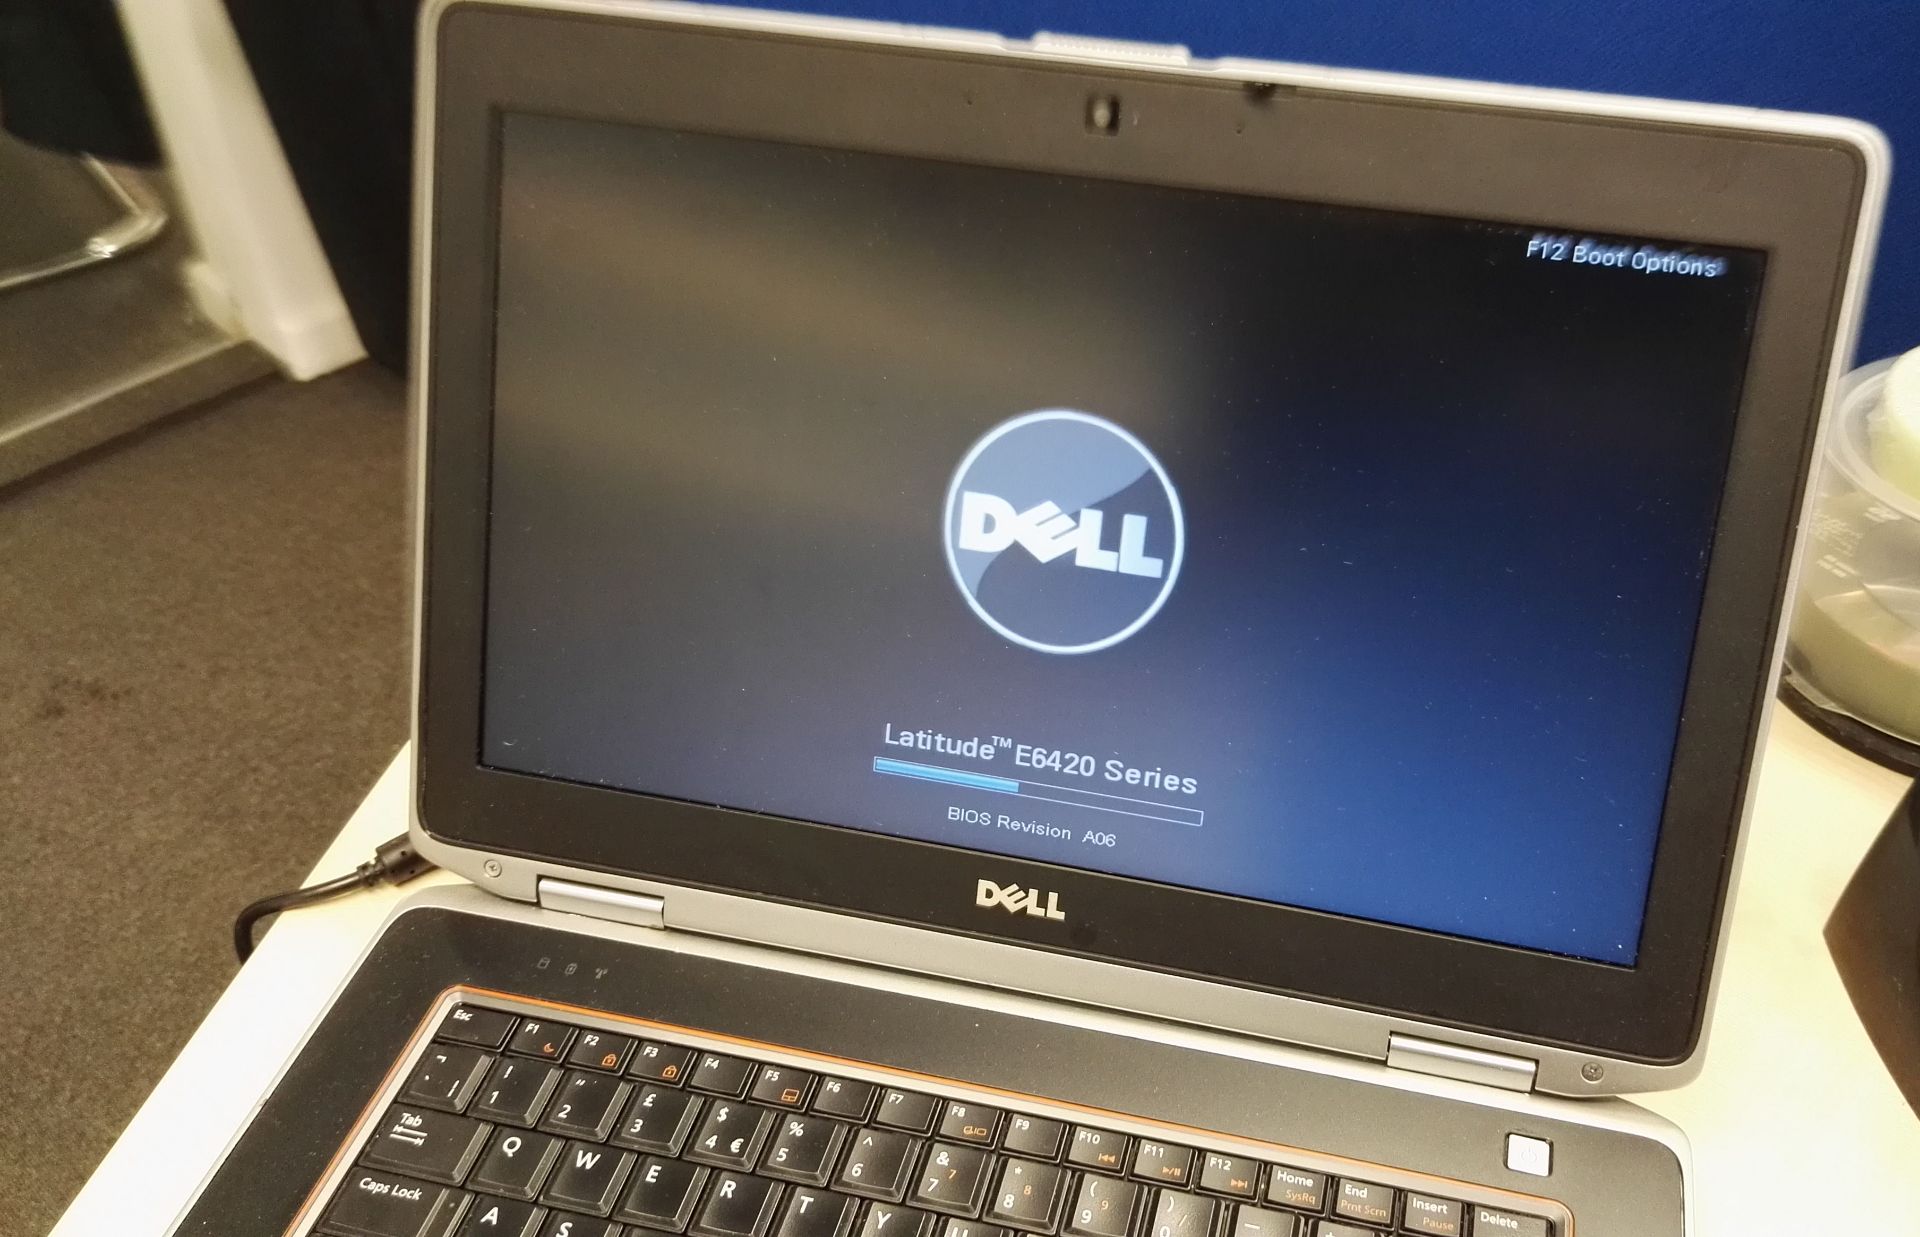 1 x Dell E6420 Latitude Laptop Computer - Features 6gb RAM, 320gb Hard Drive, Intel i5 2.5GHz - Image 10 of 19